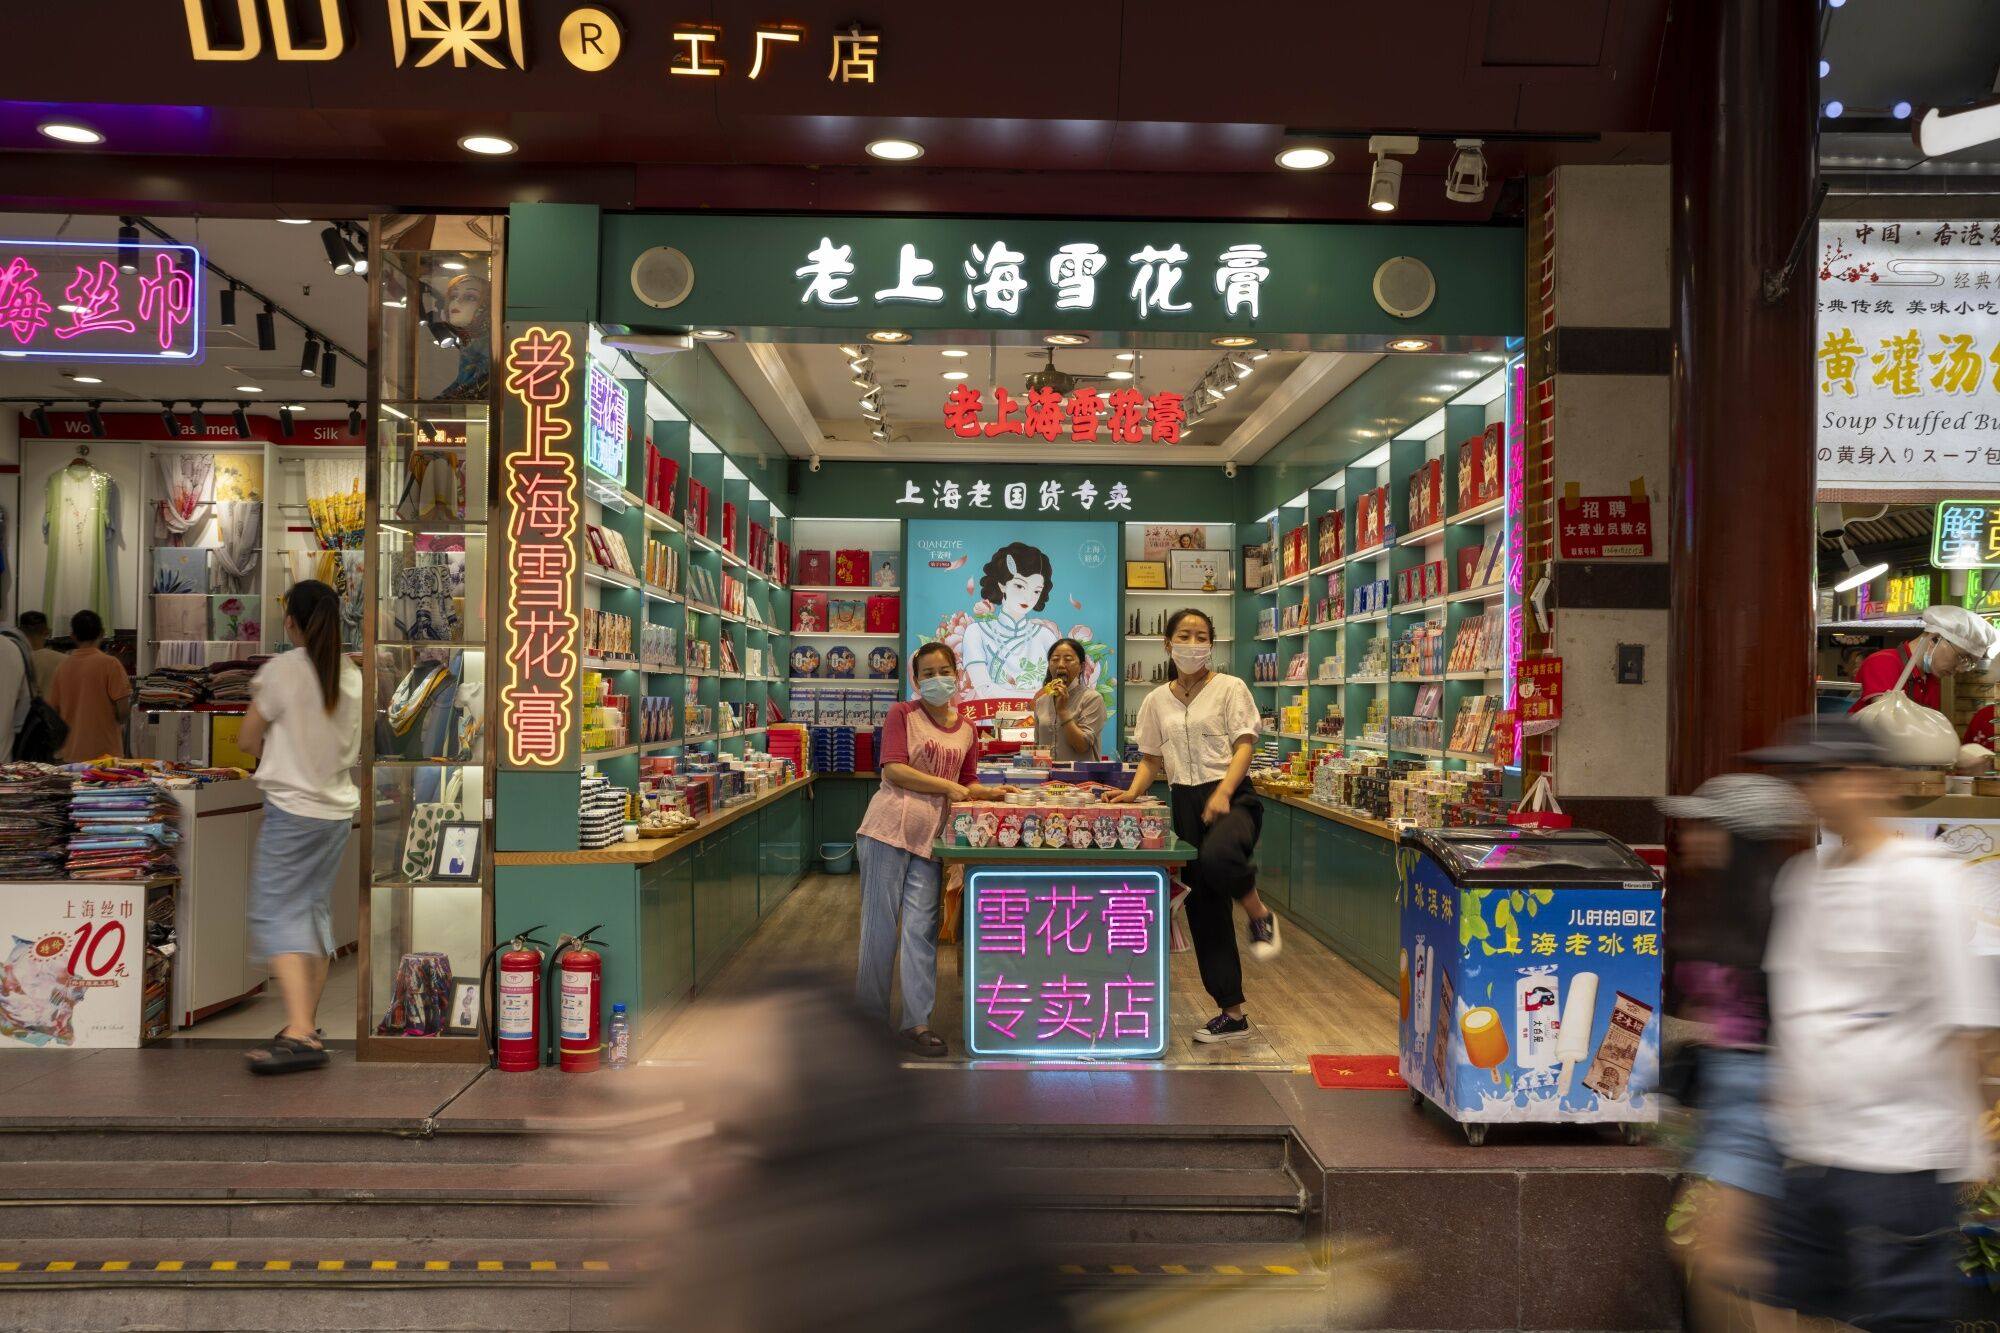 Beijing is vowing to keep business policies stable and transparent, and it will dispatch teams of investigators next month to hear complaints. Photo: Bloomberg